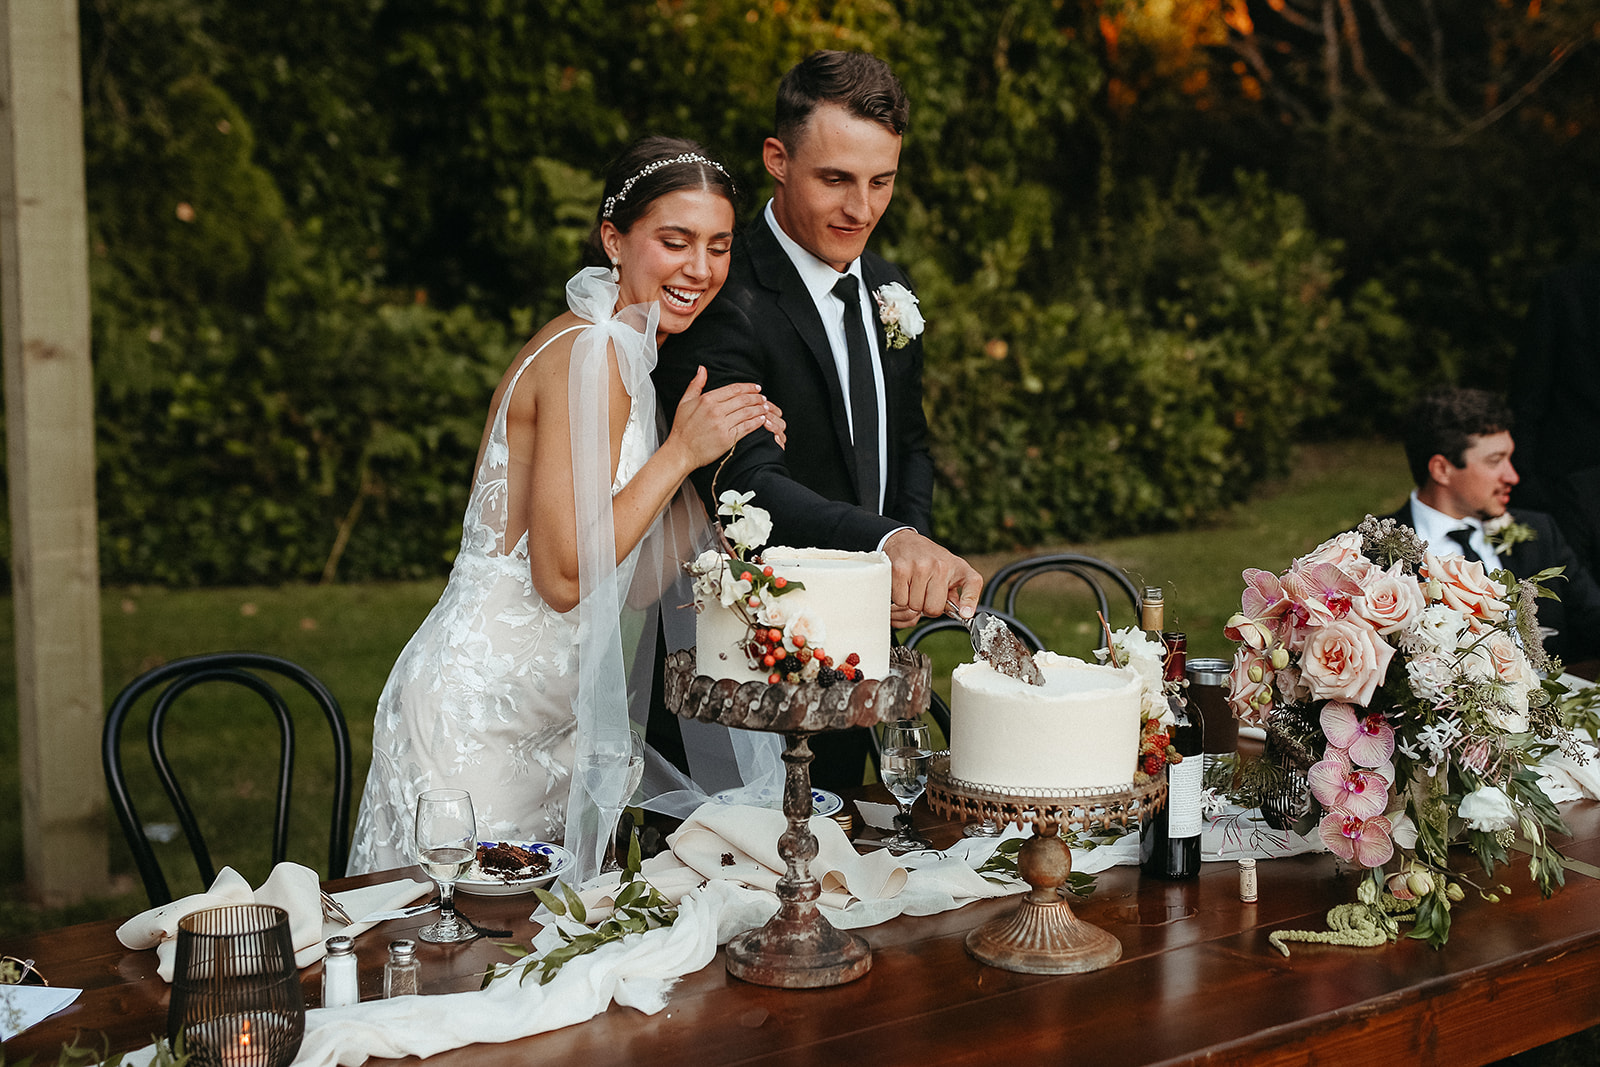 Bride and groom cutting cake at chic garden party wedding